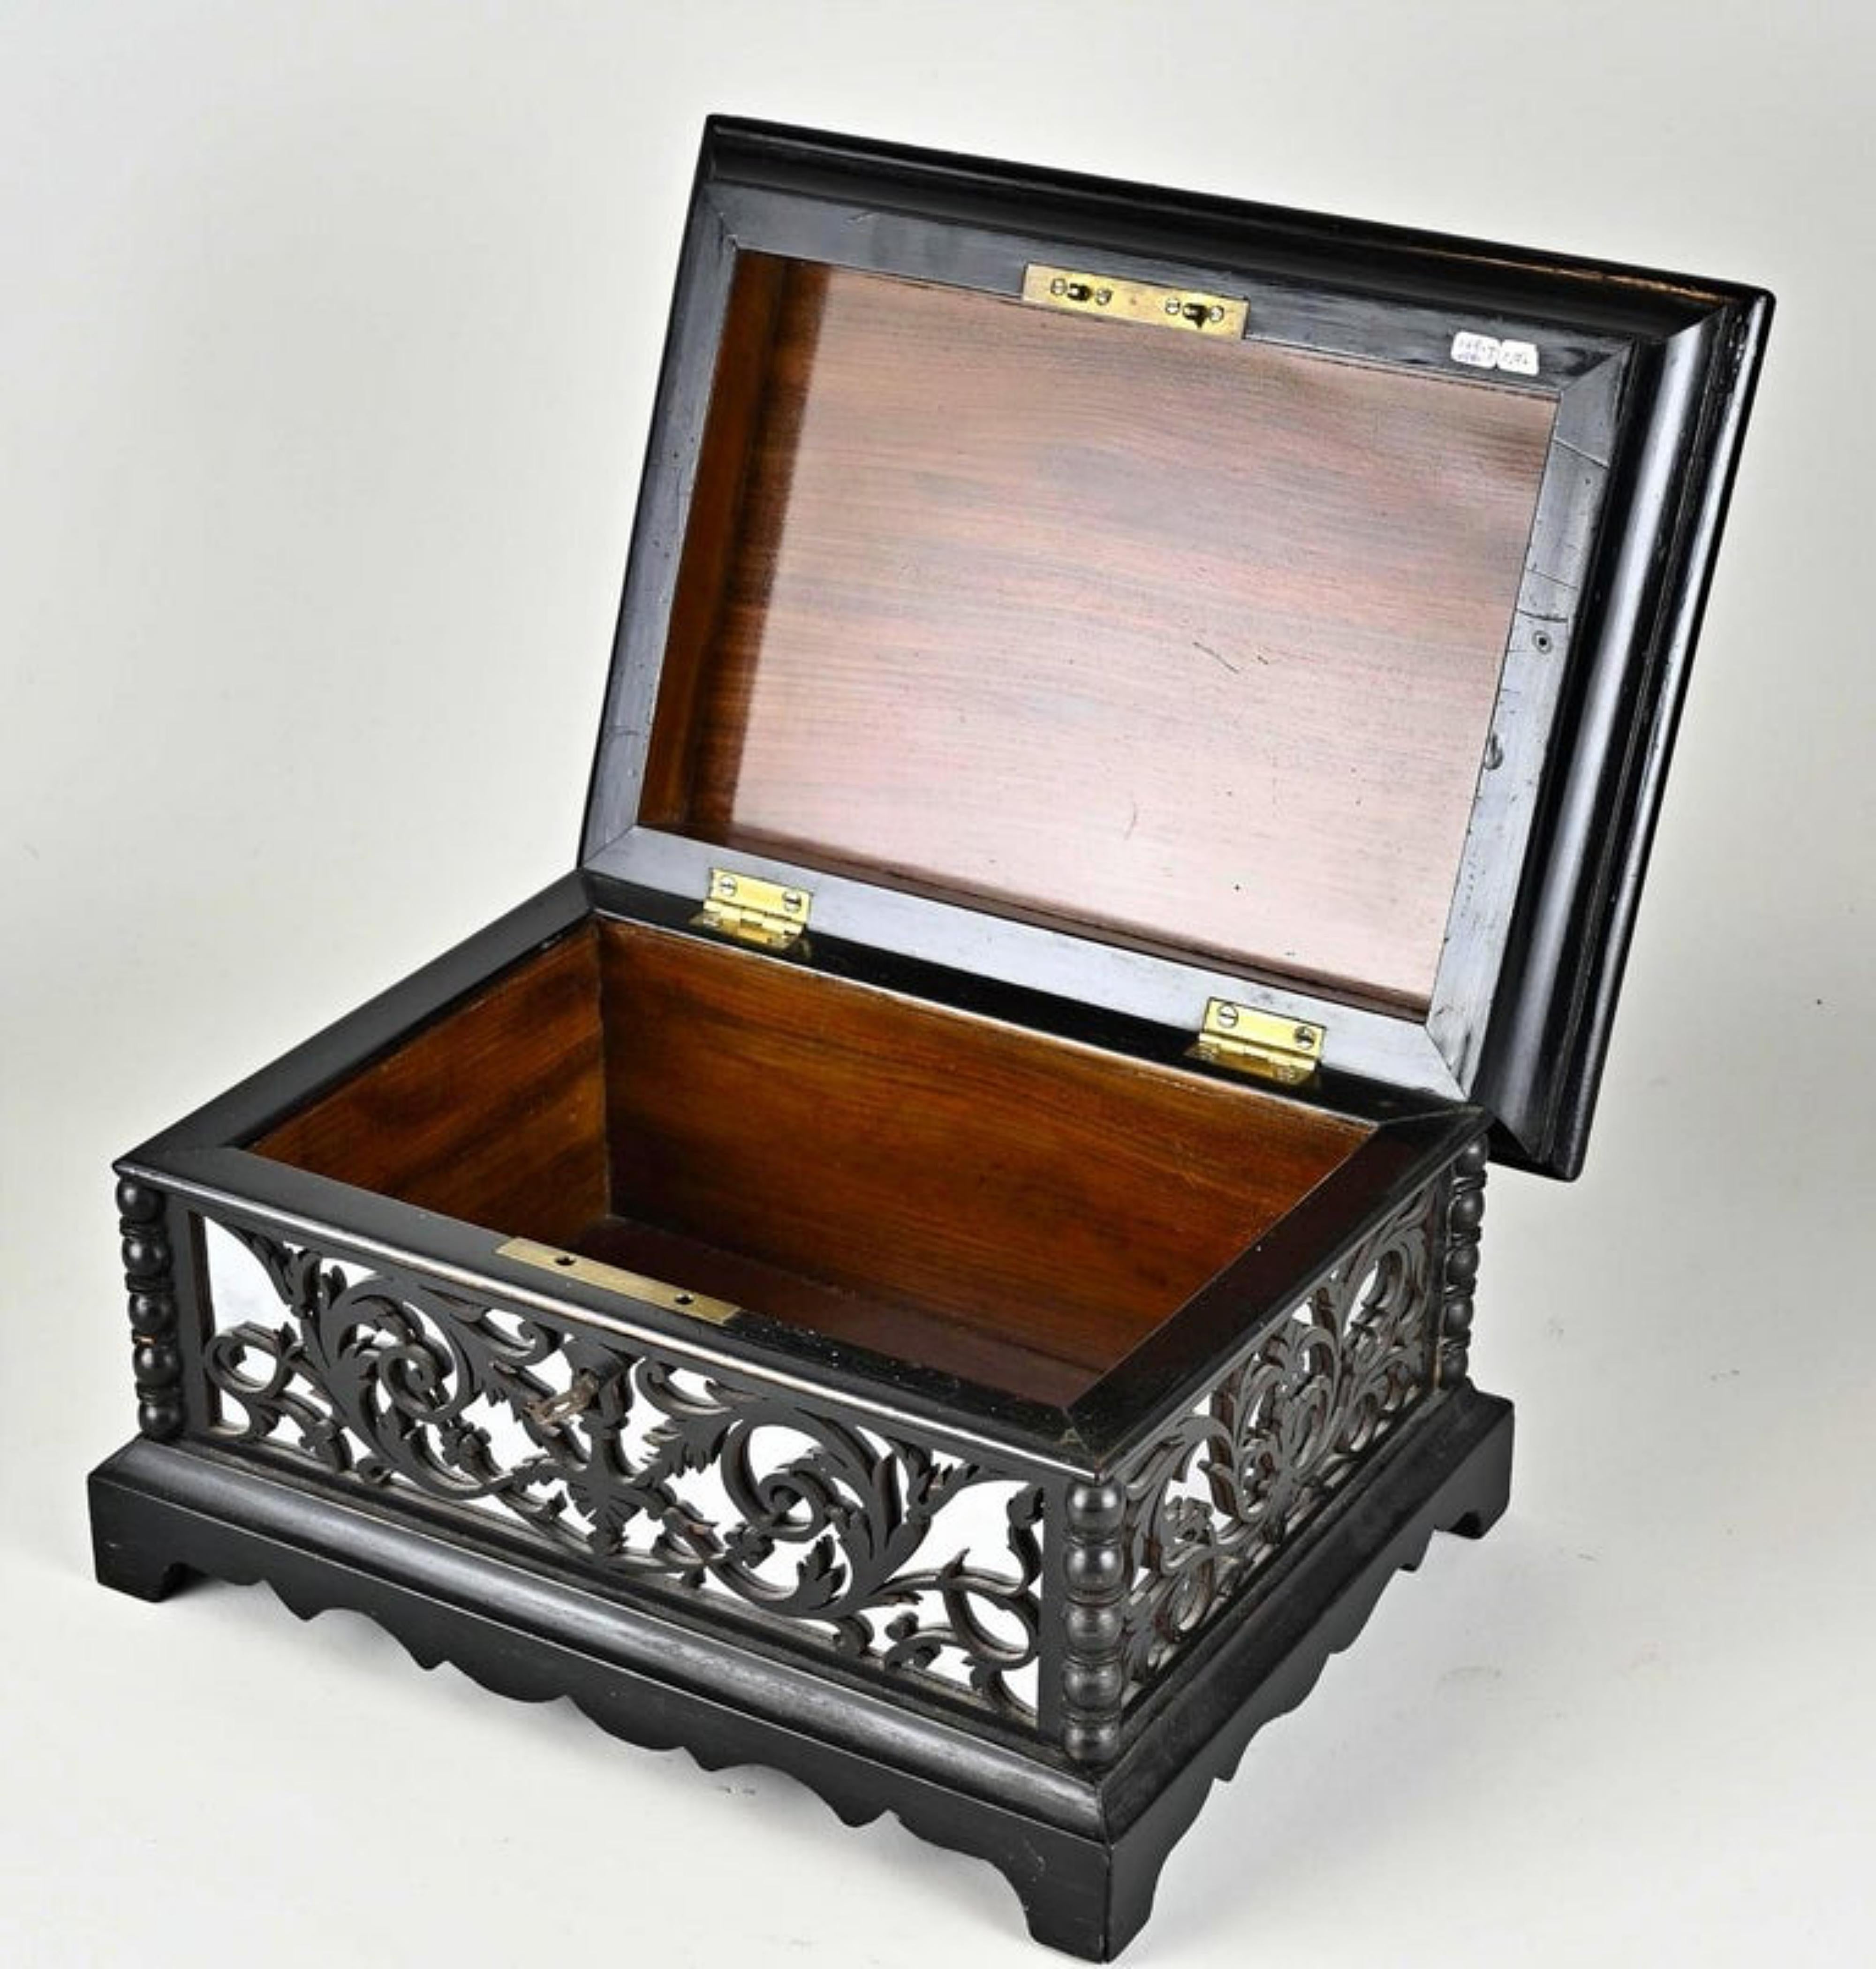 19th century French lidded box 
with boulle-style inlay on lid (sawwork + mirrors). 
Dimensions: 7 x 31 x 23 cm. 
In good condition.
 